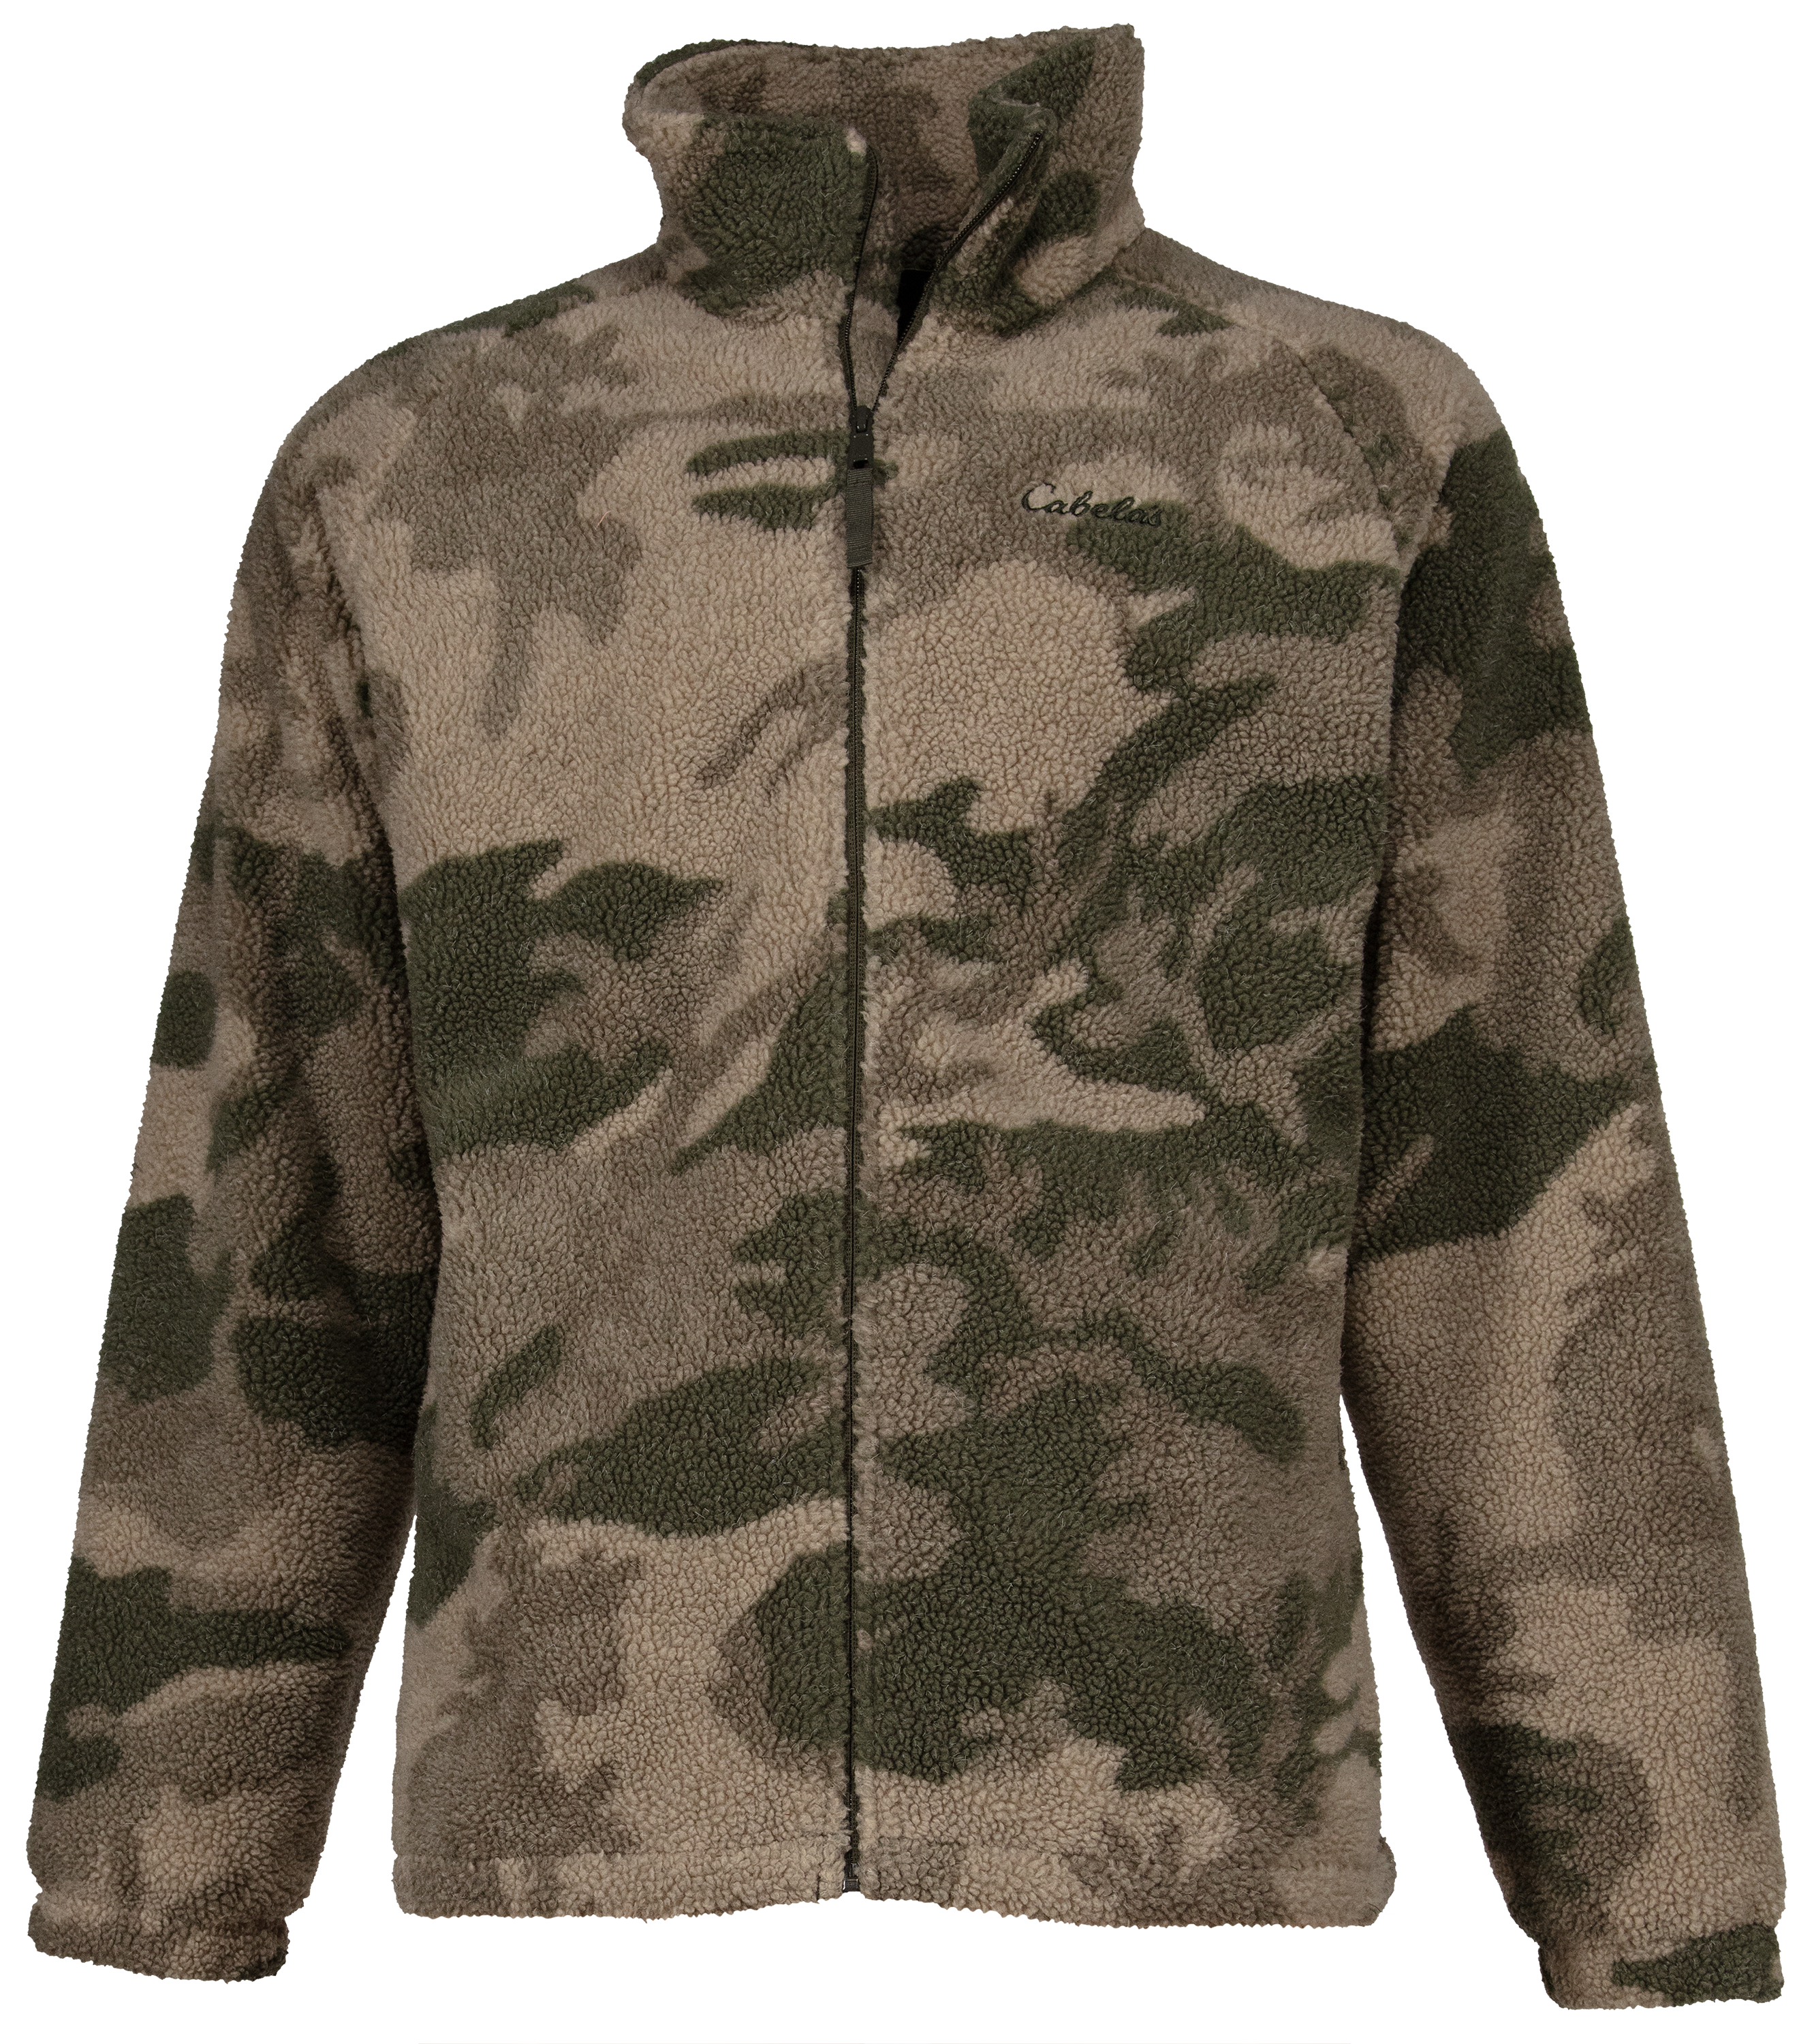 Cabela's Outfitter Series Berber Jacket with 4MOST WINDSHEAR for